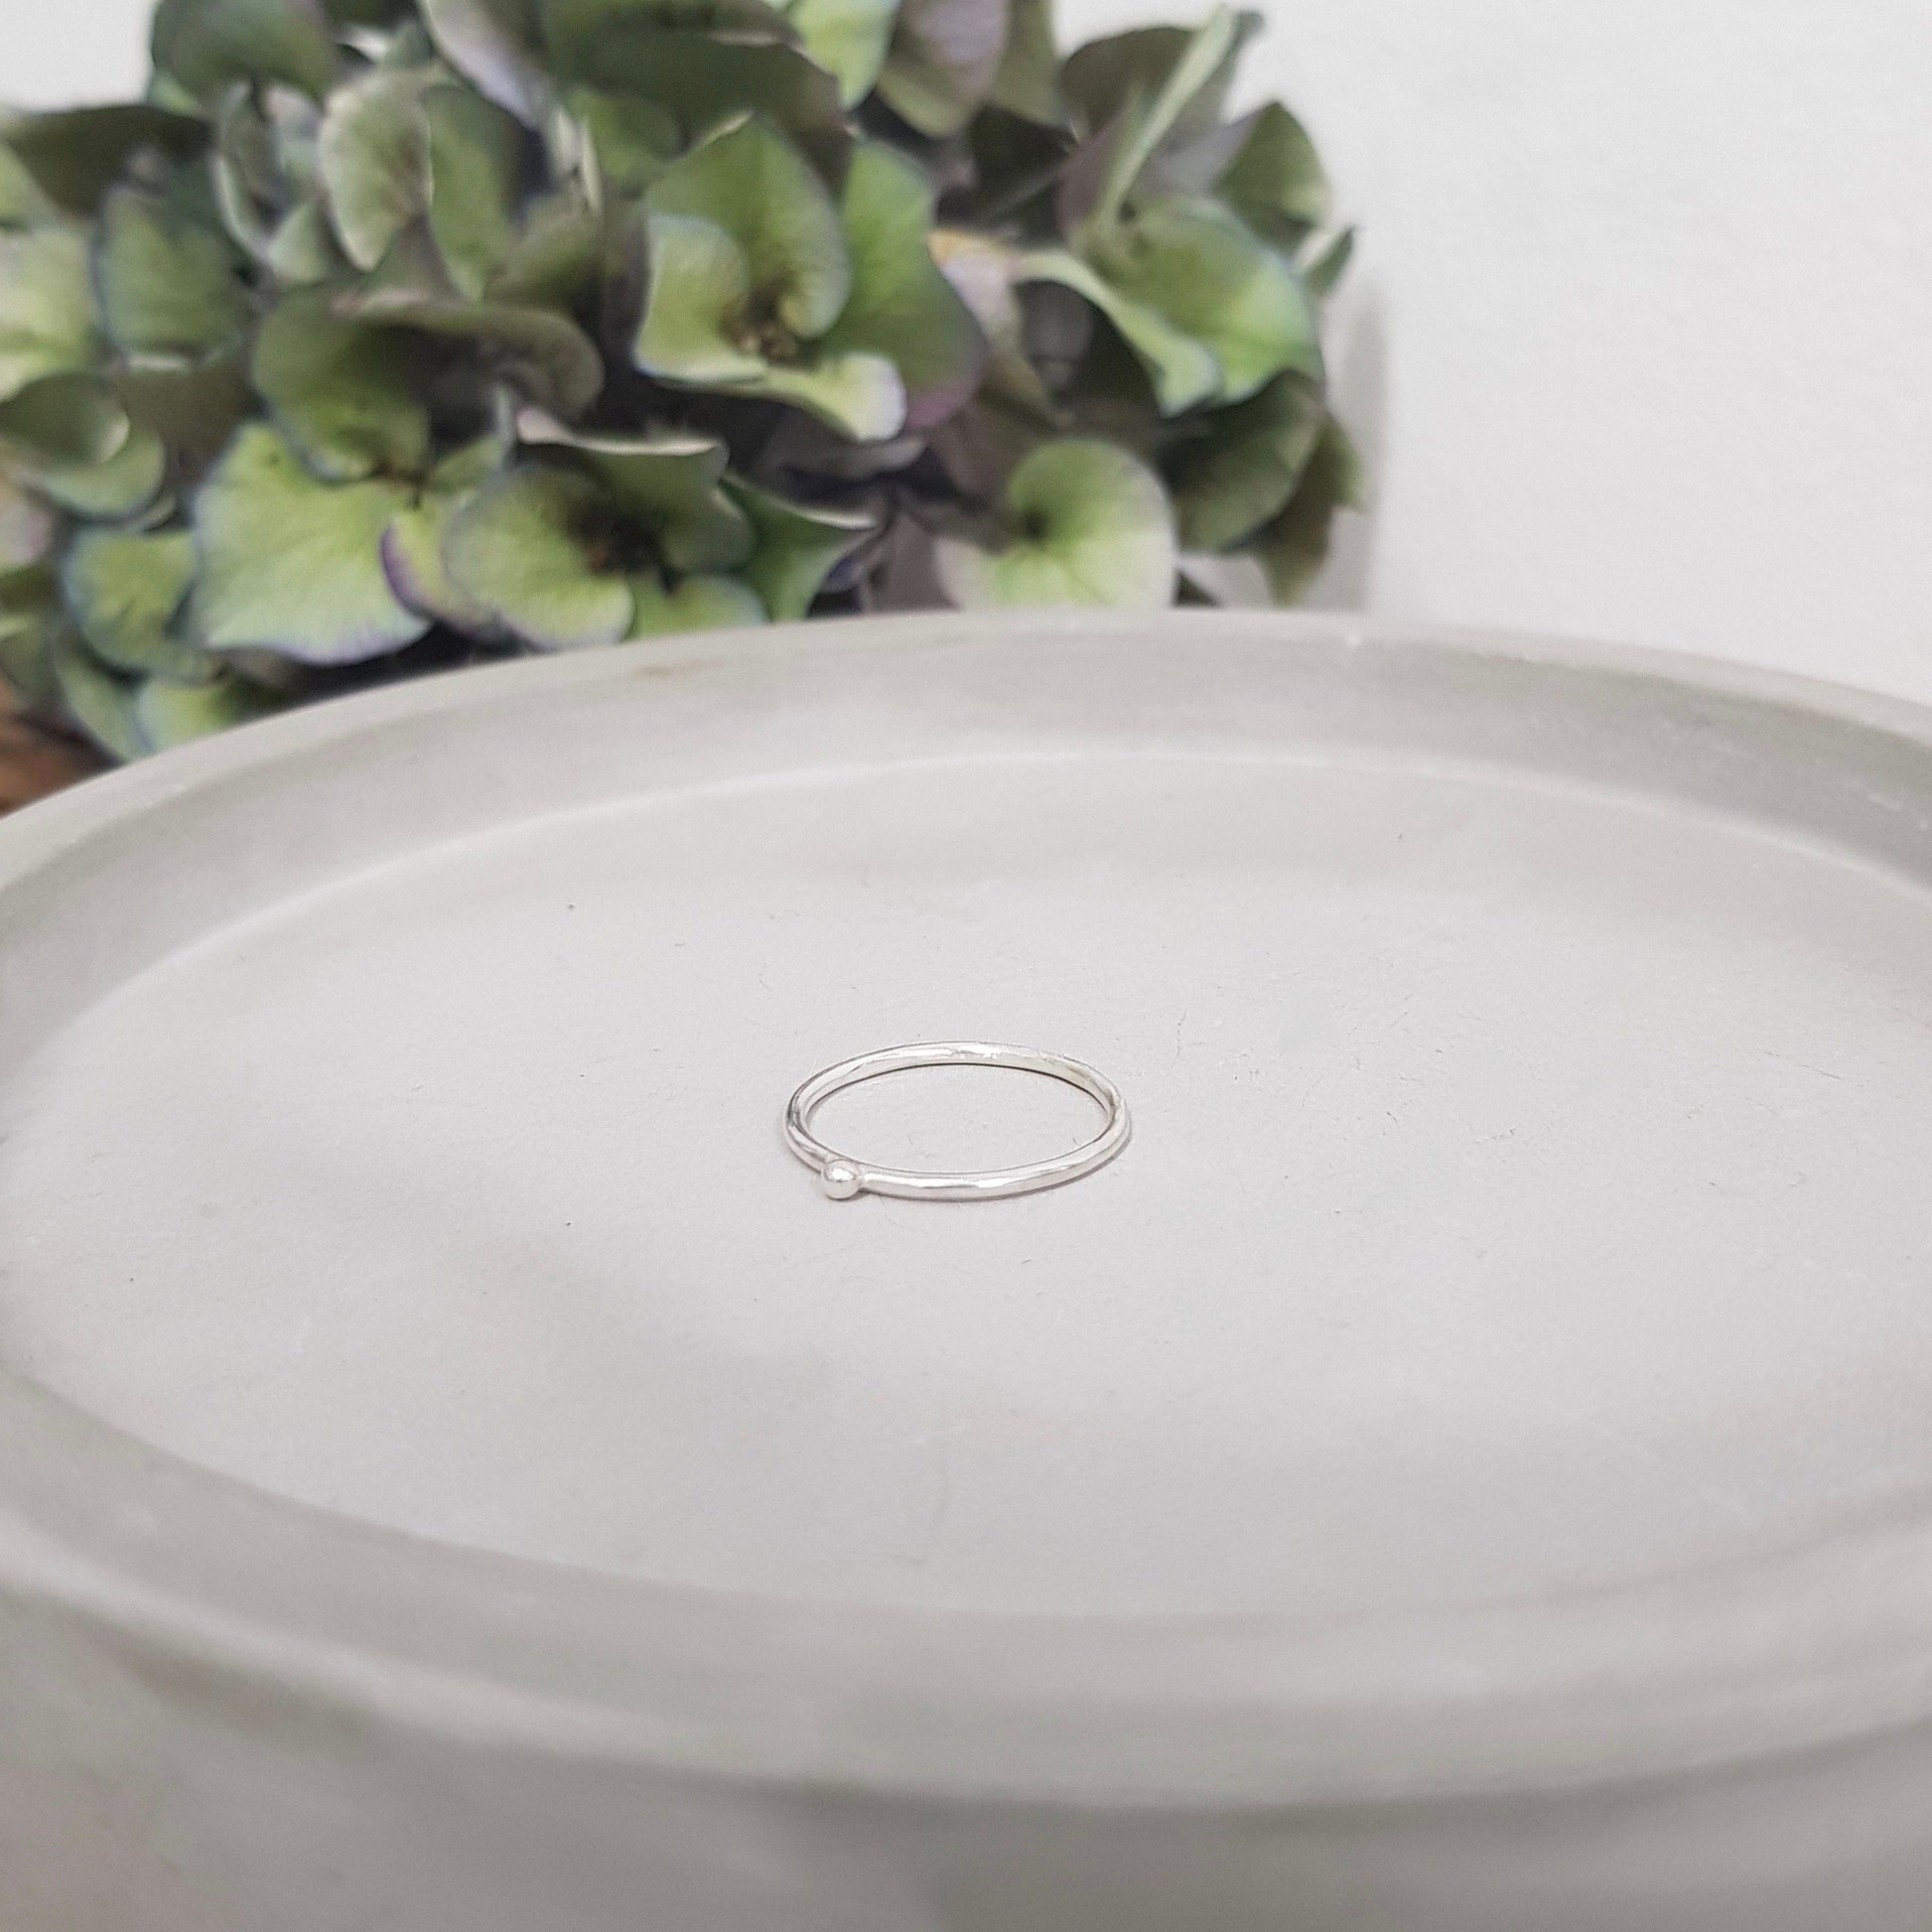 Silver Stacking Ring with small ball - handmade silver jewellery by Anna Calvert Jewellery in the UK